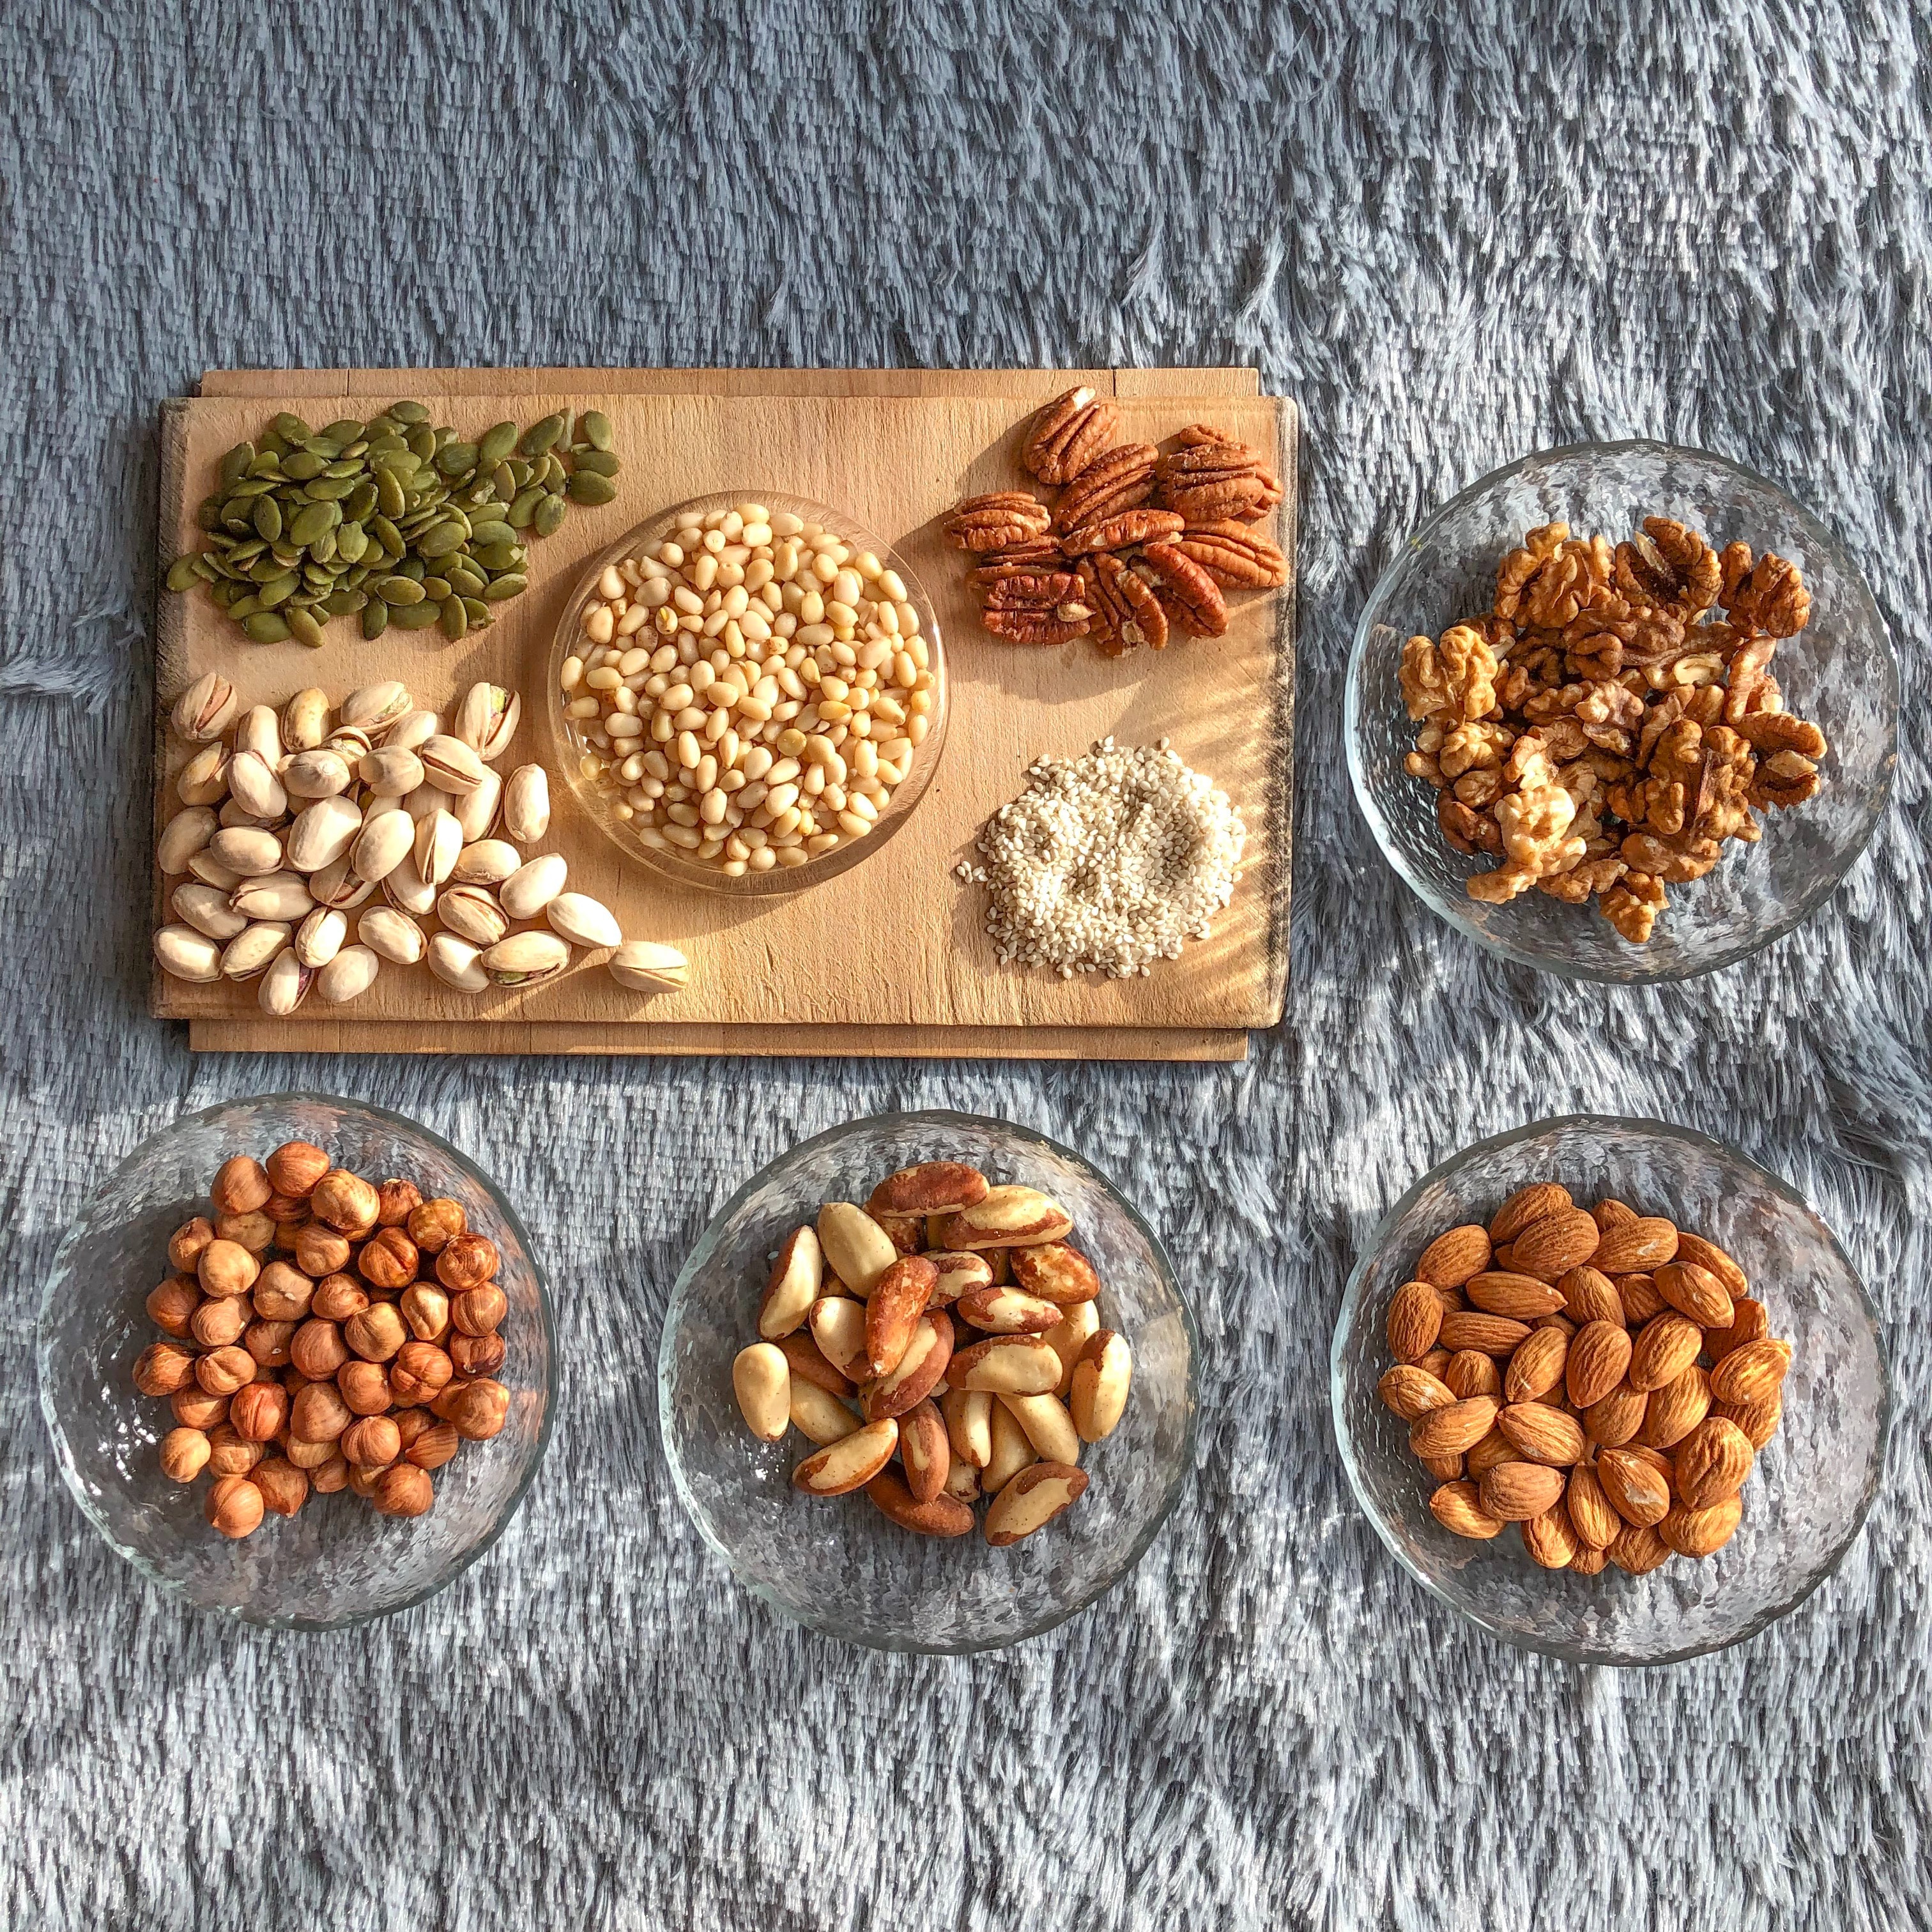 Nuts have an anti-insulin resistance effect